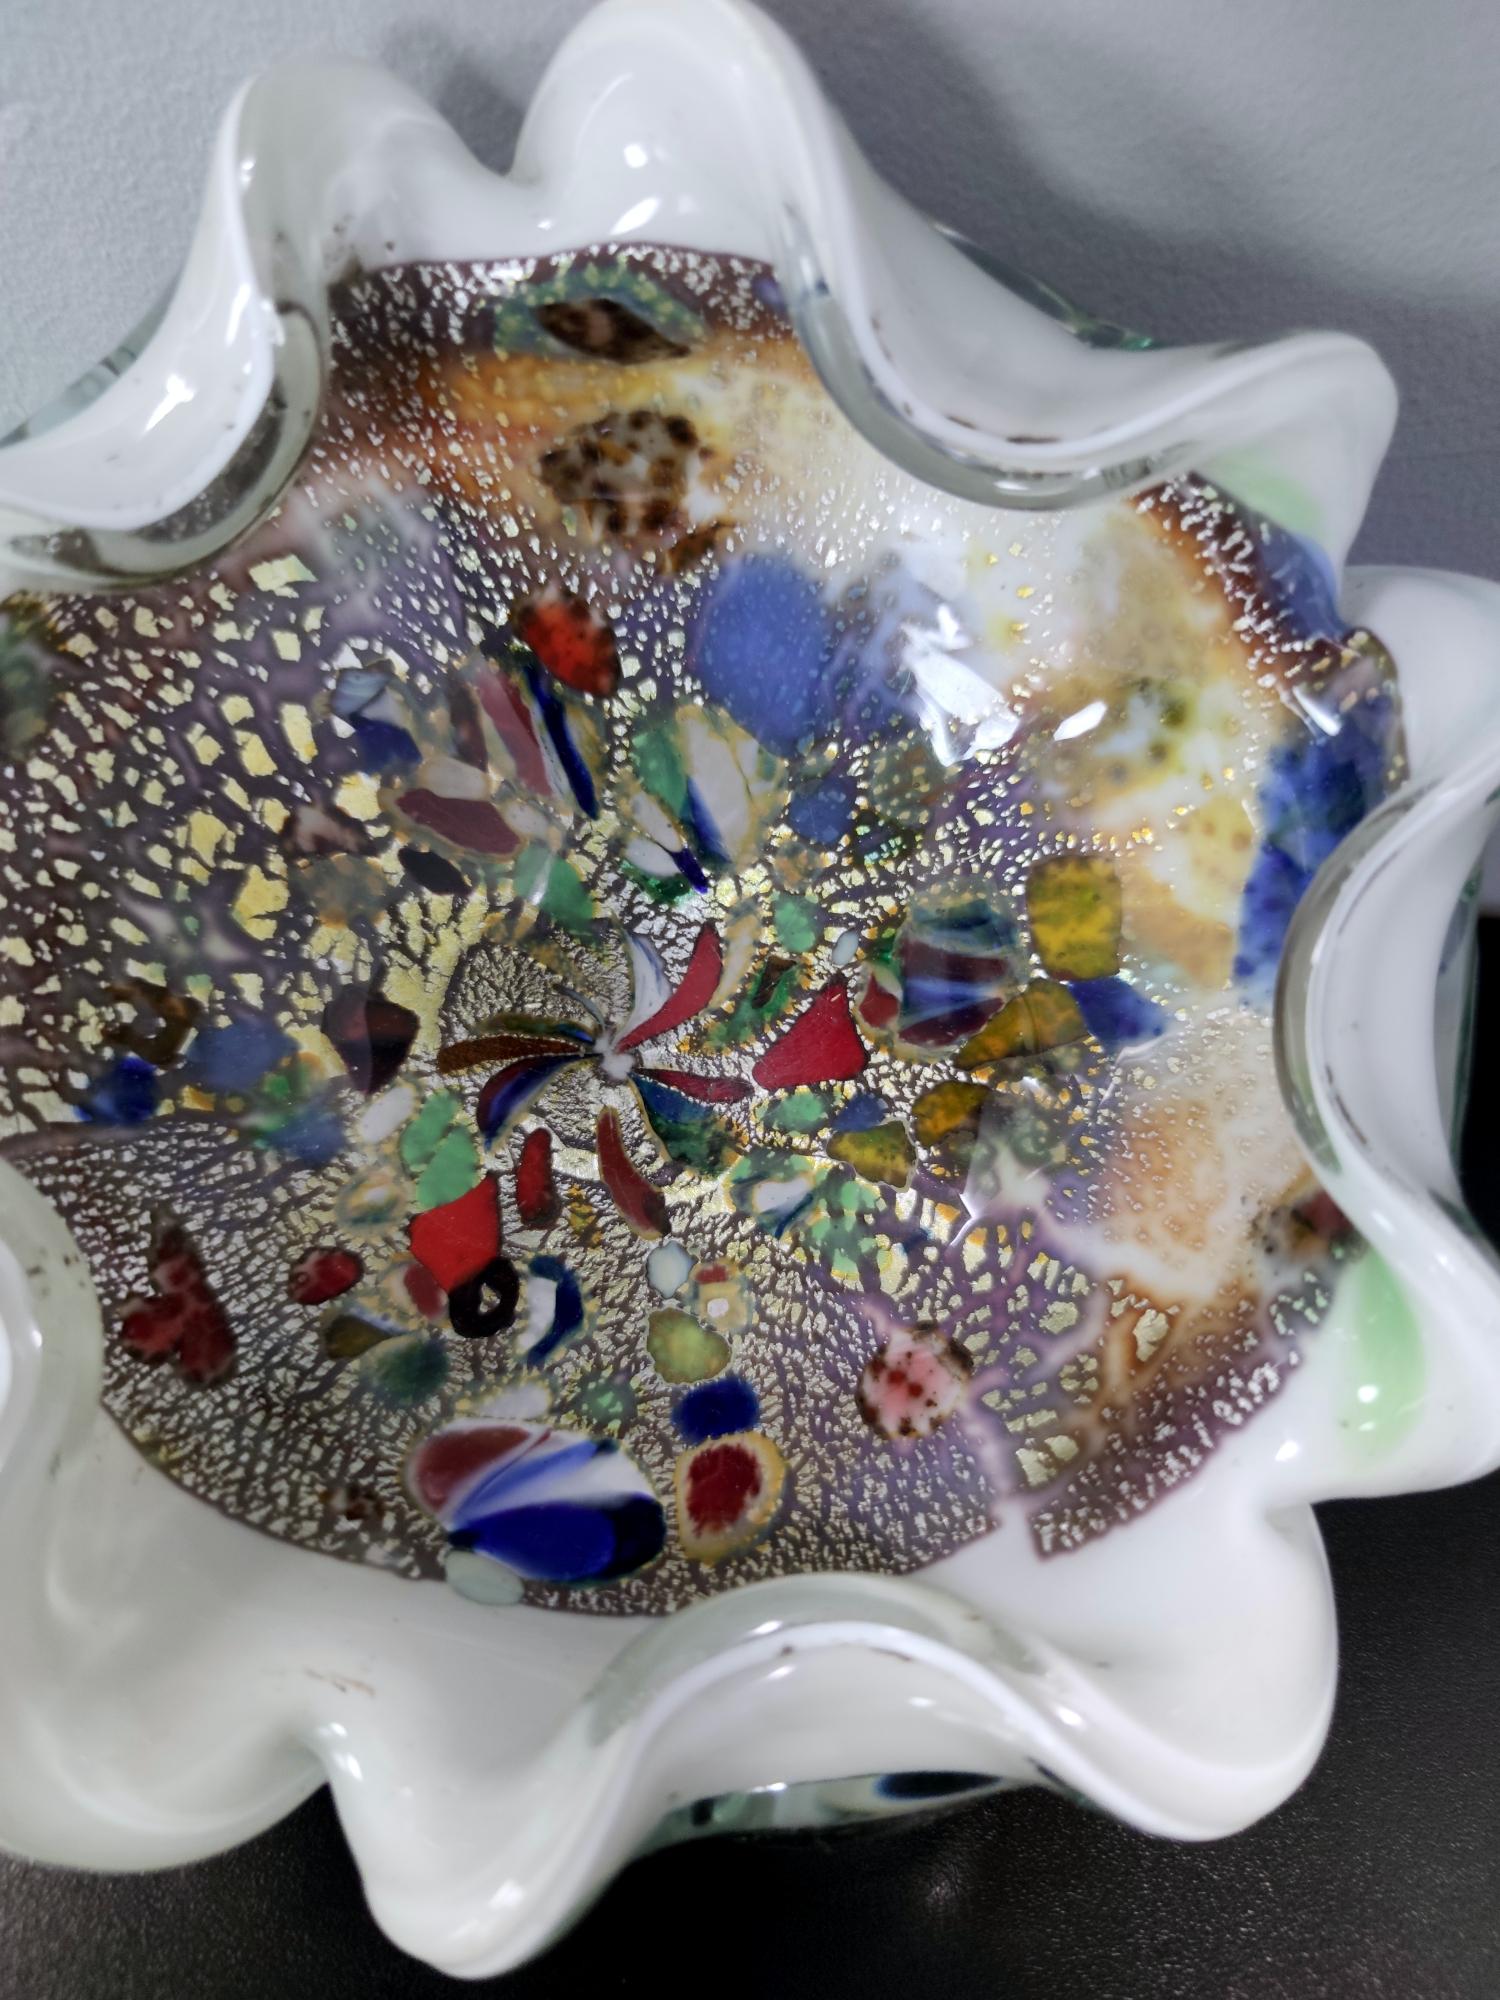 Mid-20th Century Vintage Murano Glass Ashtray or Trinket Bowl by Avem Attributed to Dino Martens For Sale